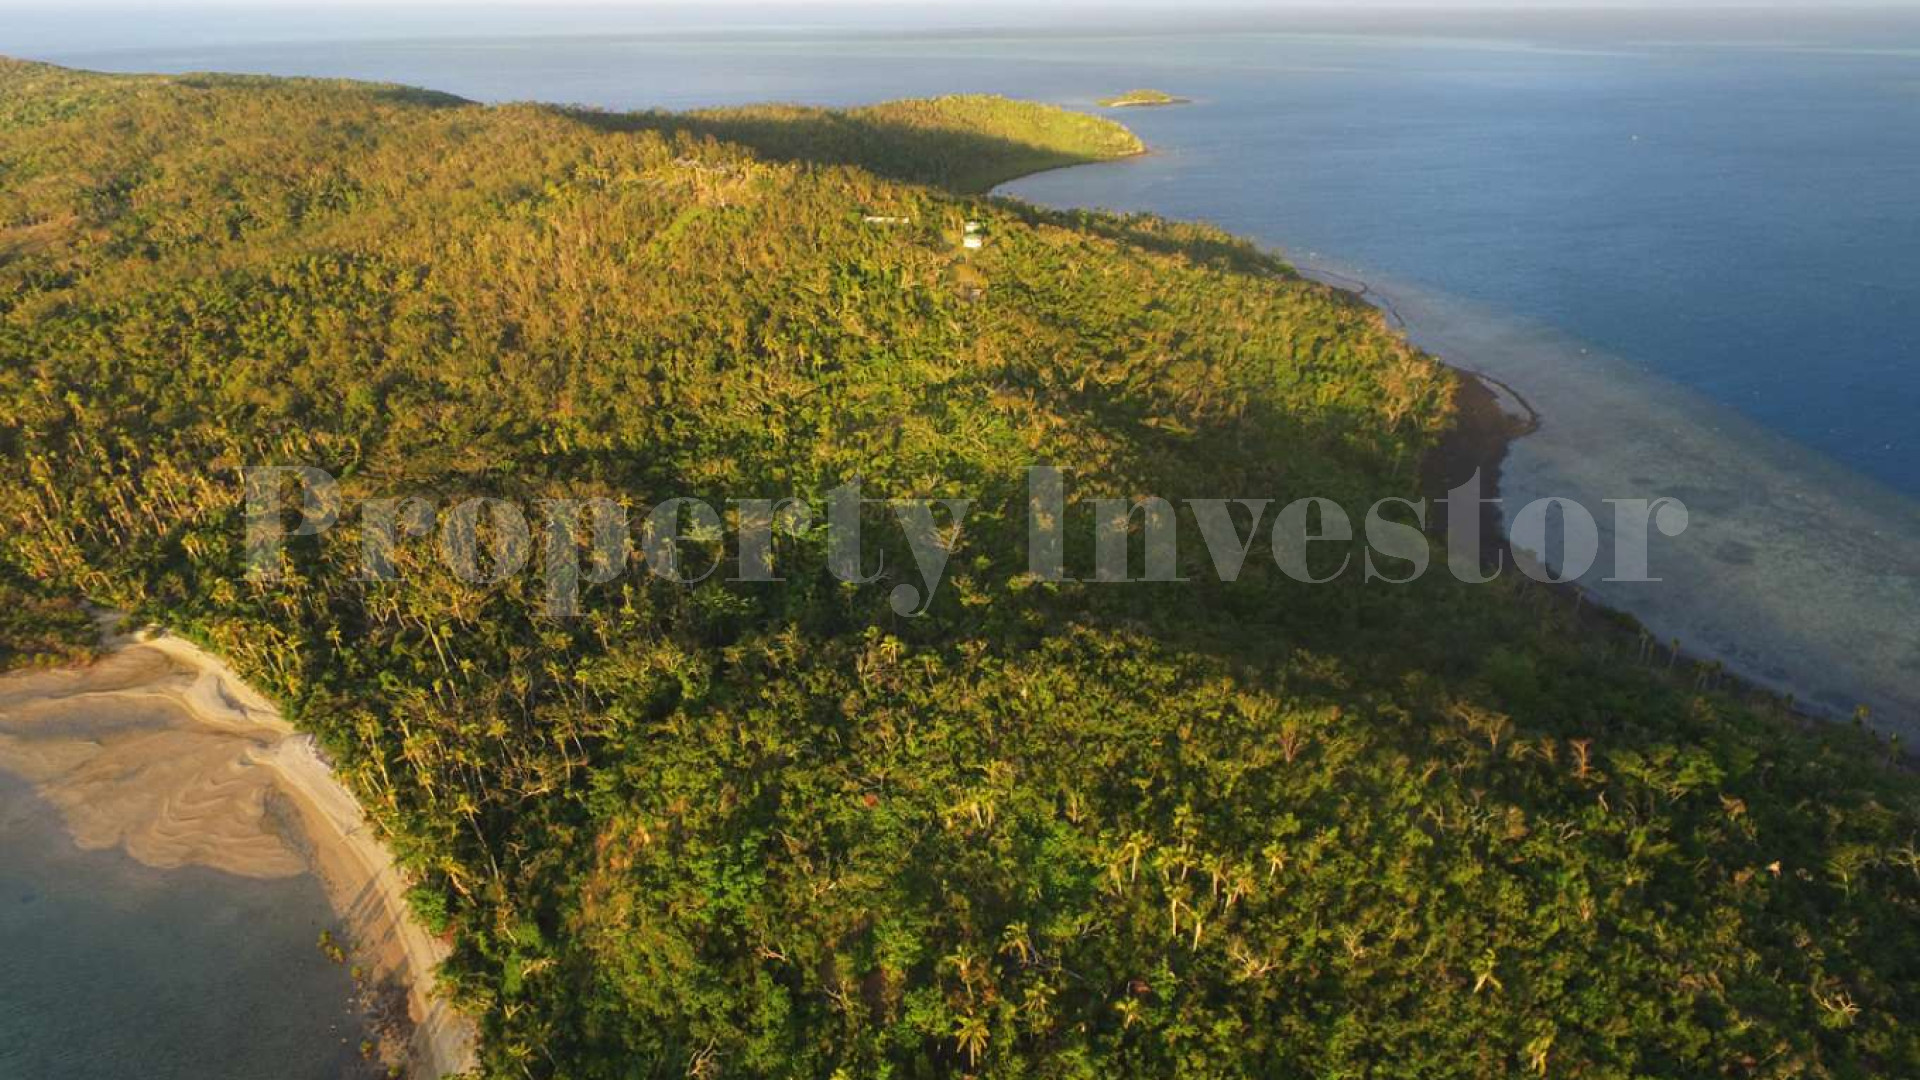 Spectacular 242 Hectare Private Island & Residence for Sale in Fiji